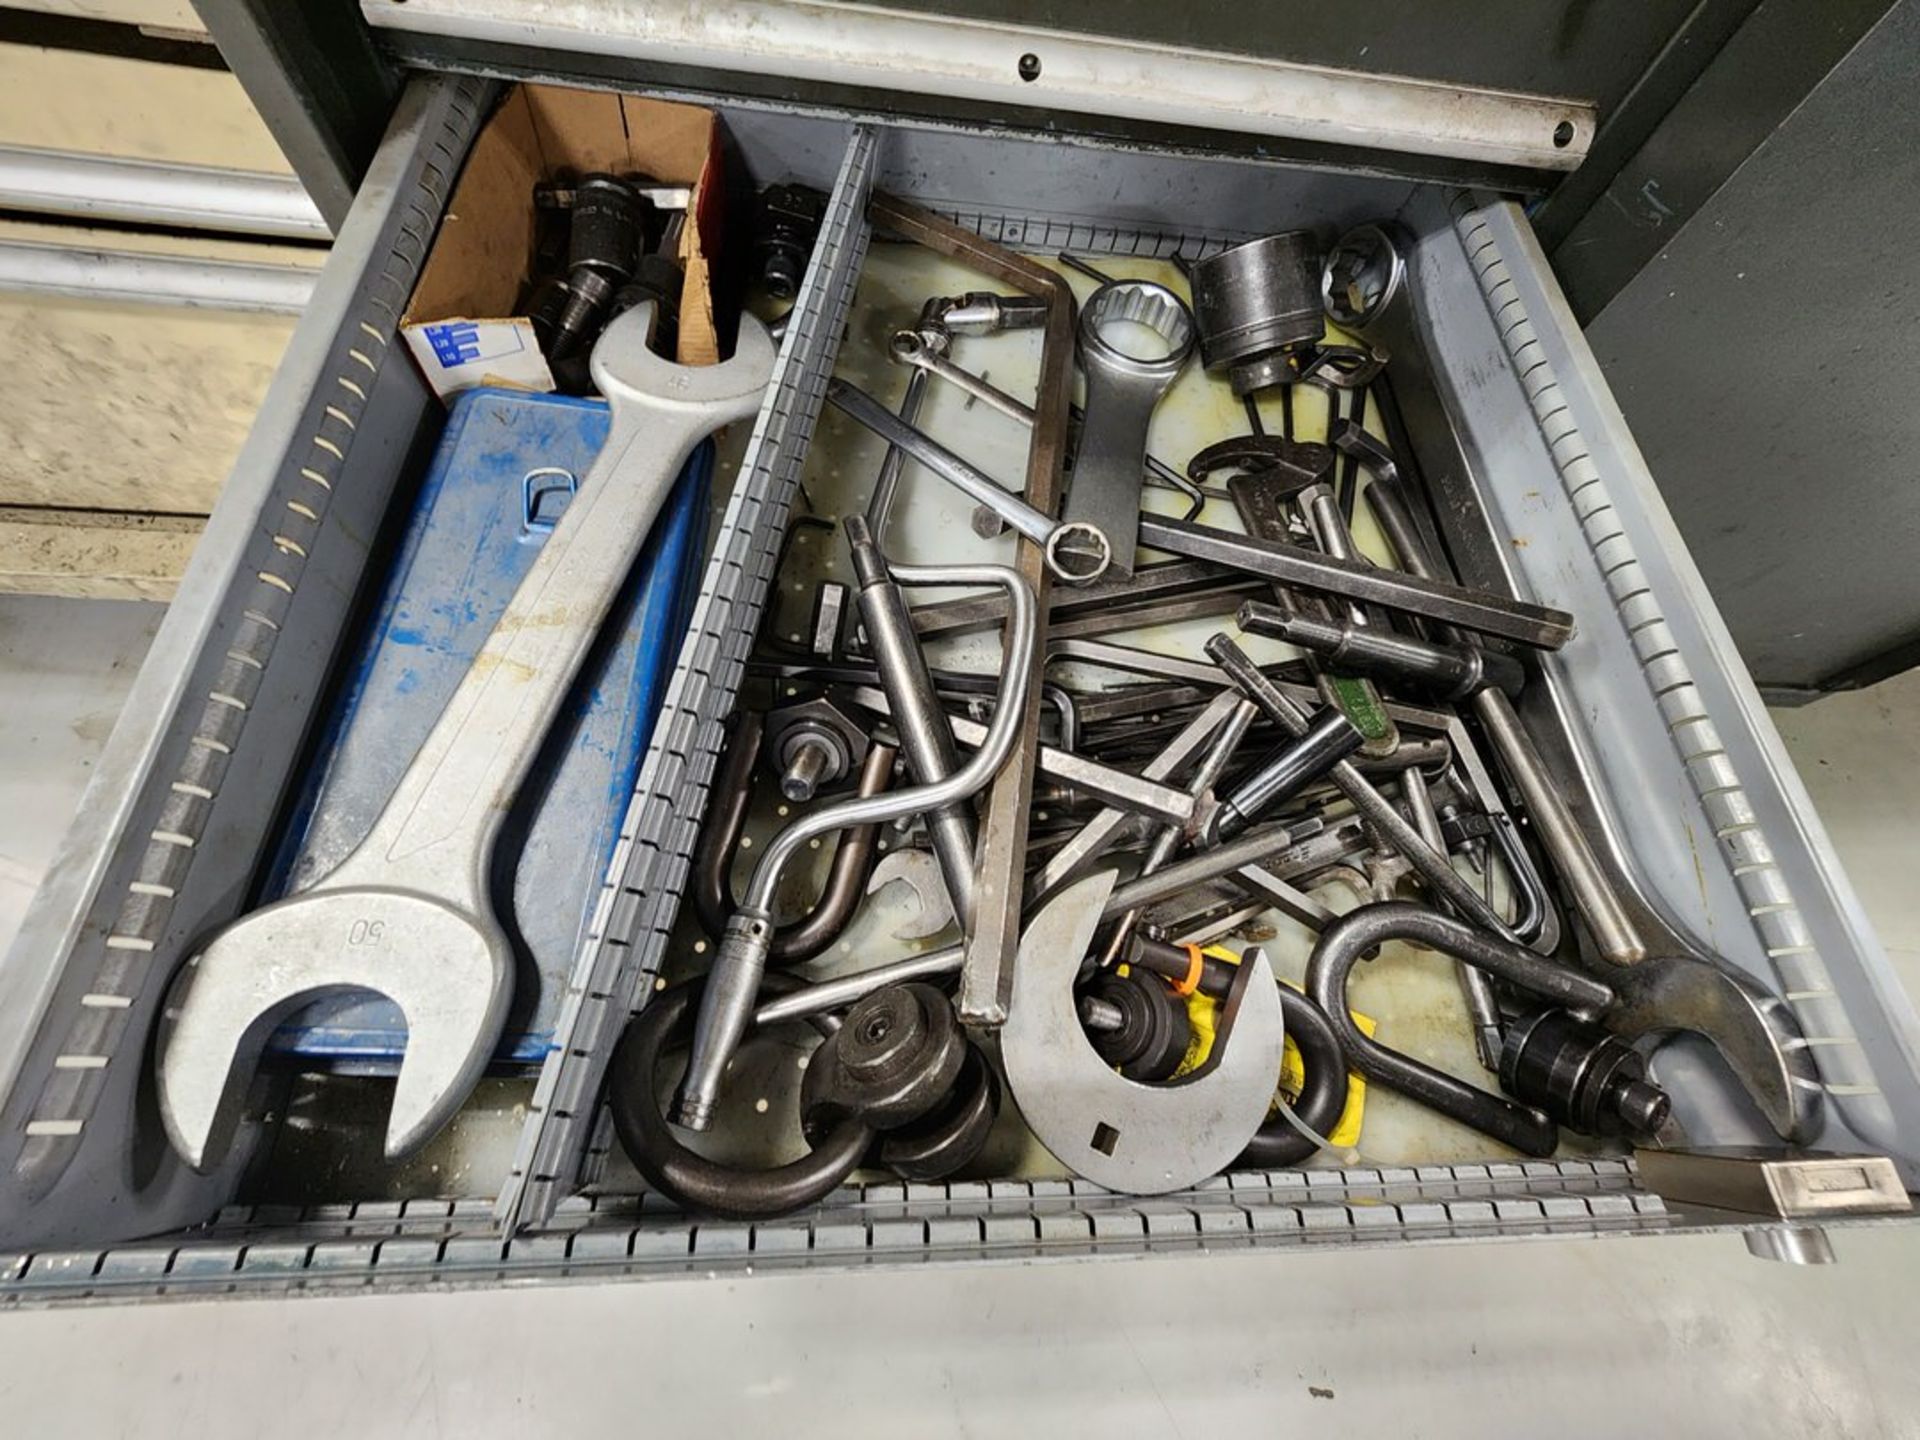 Ele Material Cabinet (Contents Excl.) - Image 6 of 8